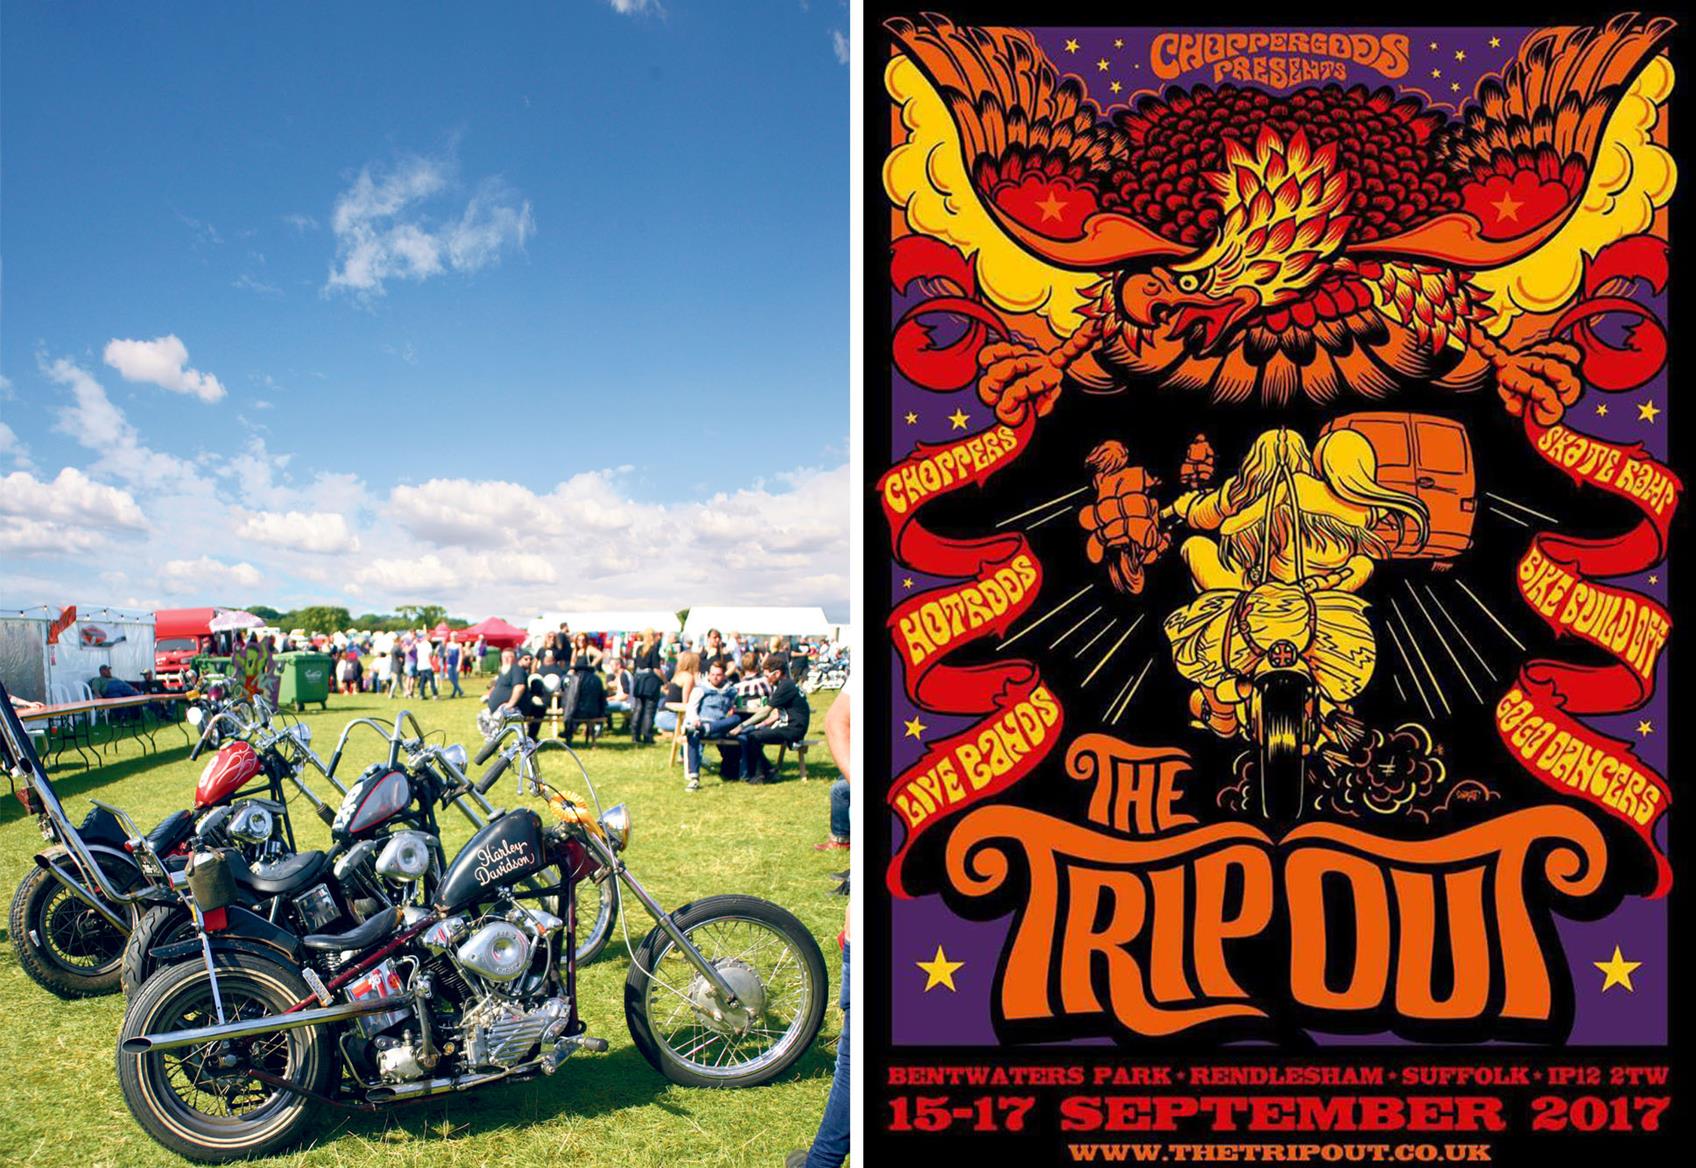 The annual Trip Out Choppers, bands and more MCN